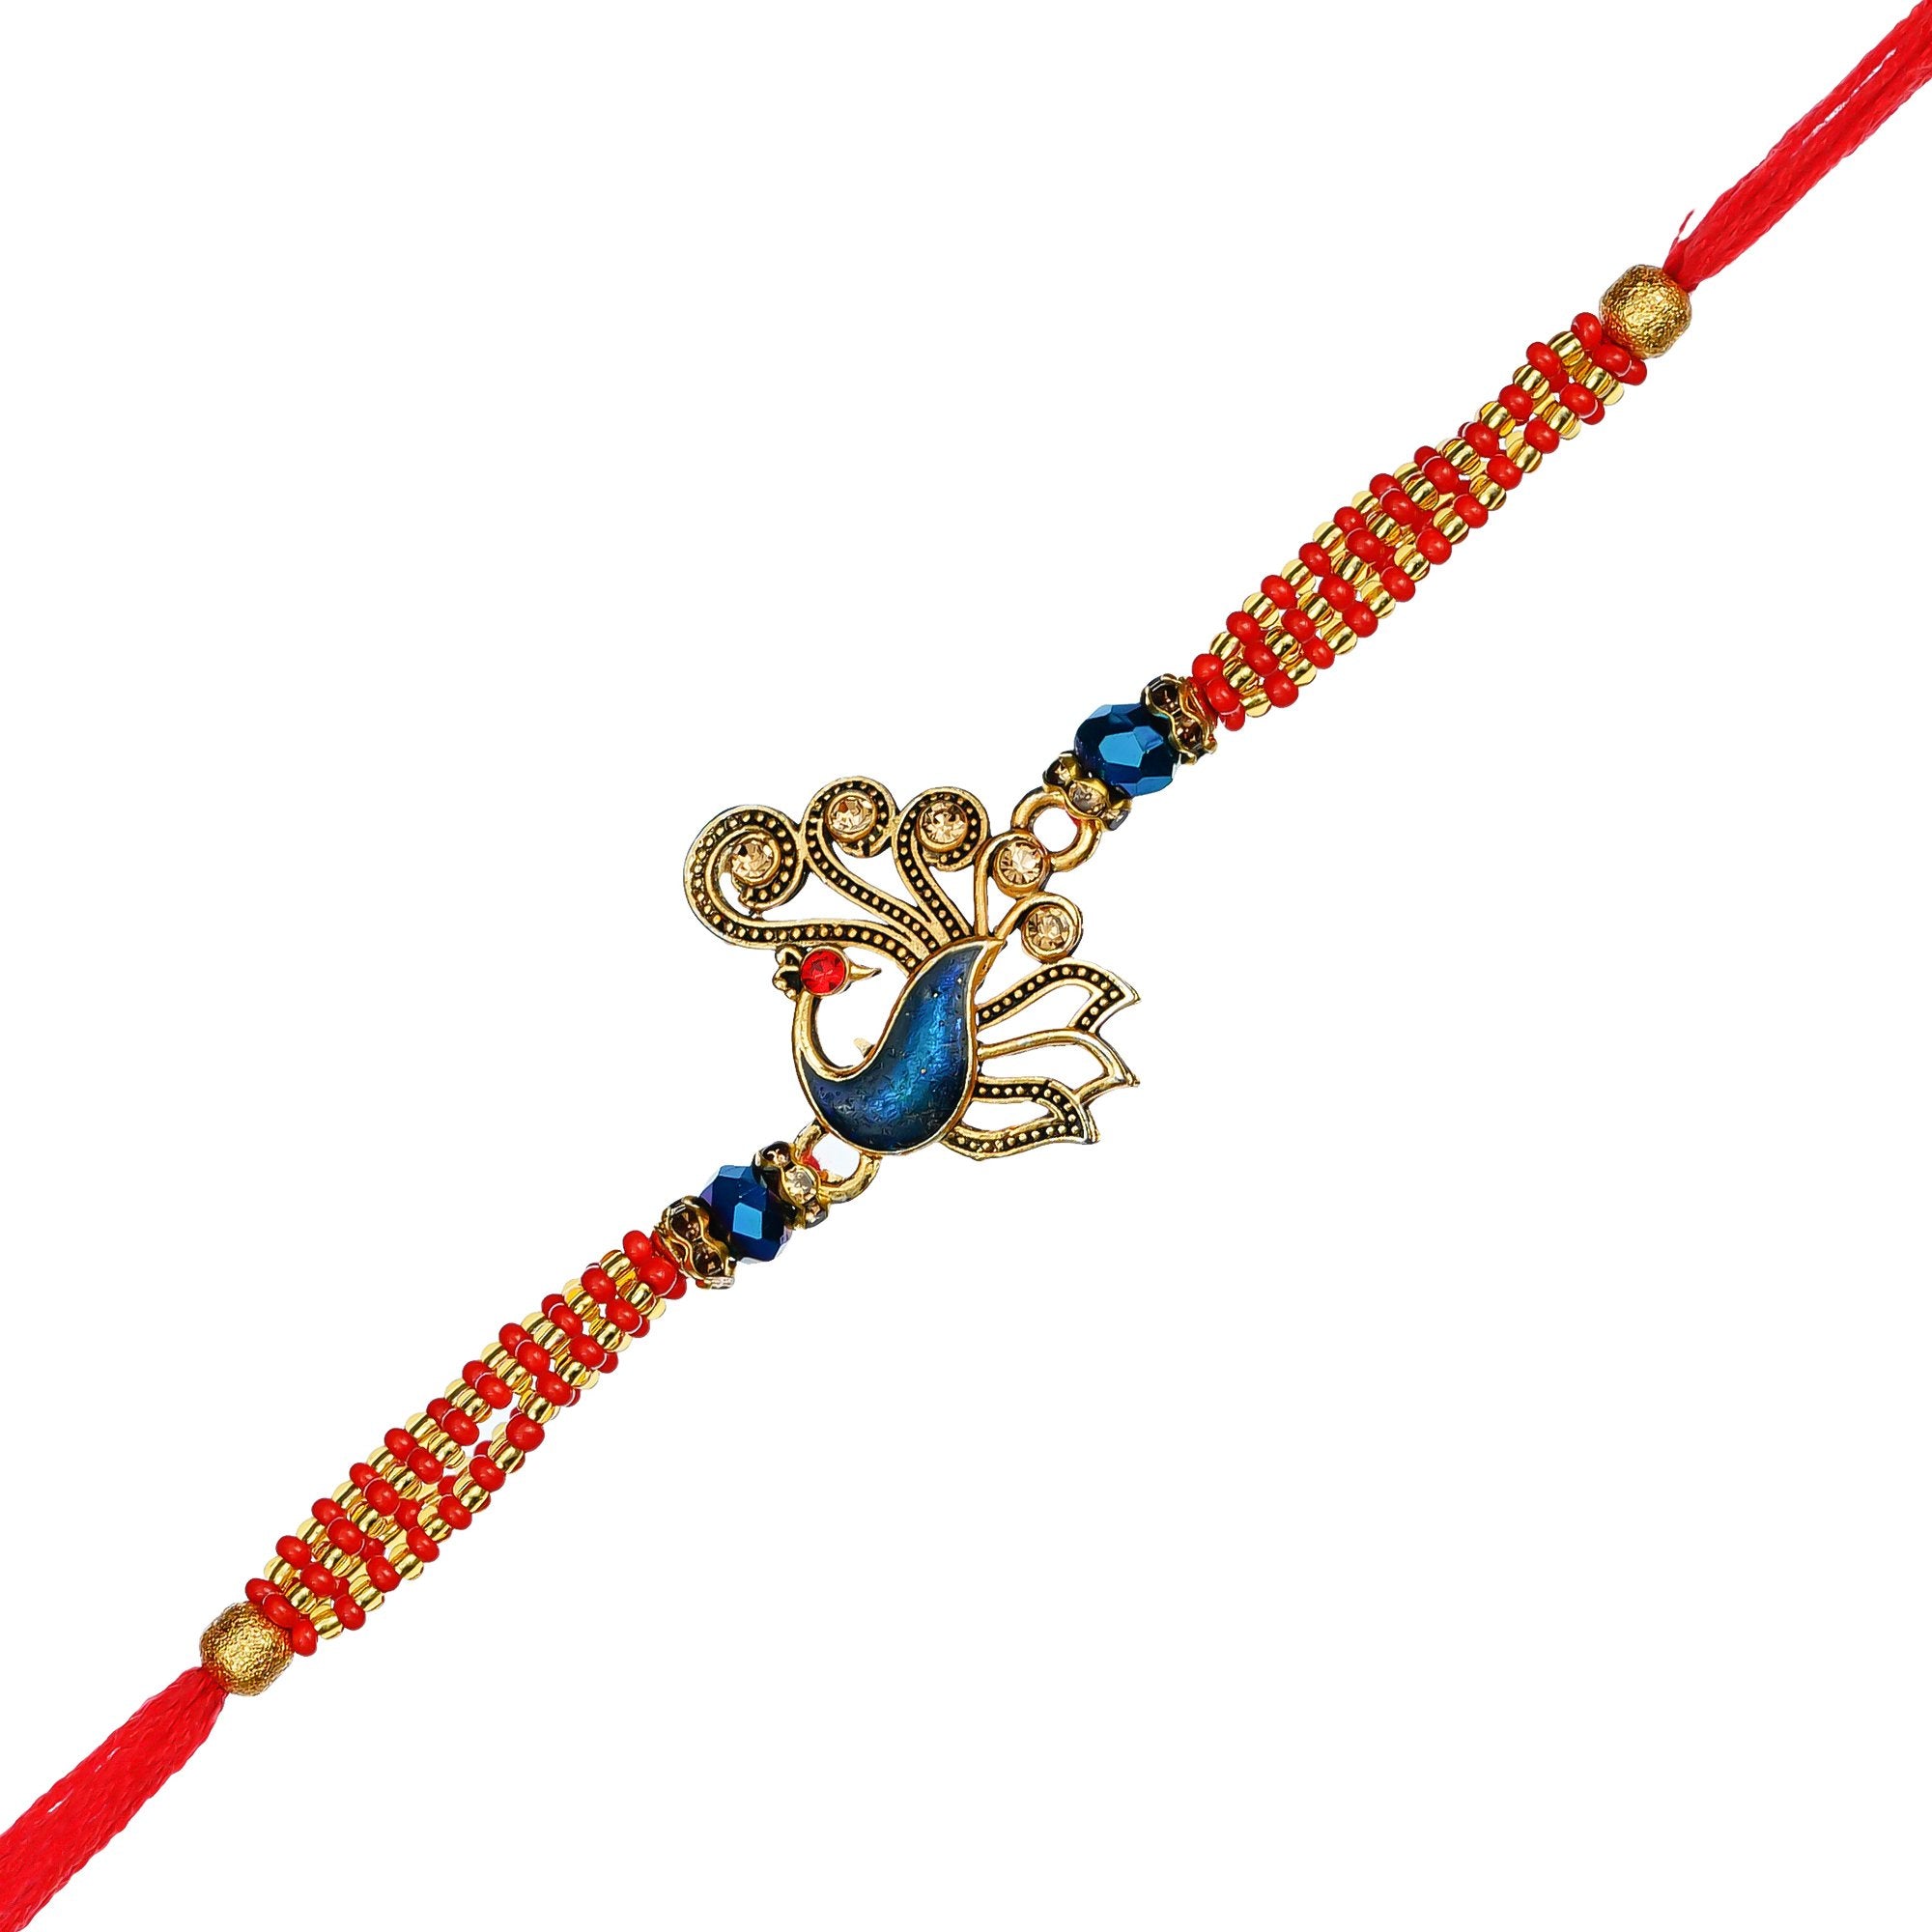 Designer Peacock Rakhi and Roli Chawal Pack, Best Wishes Greeting Card 1